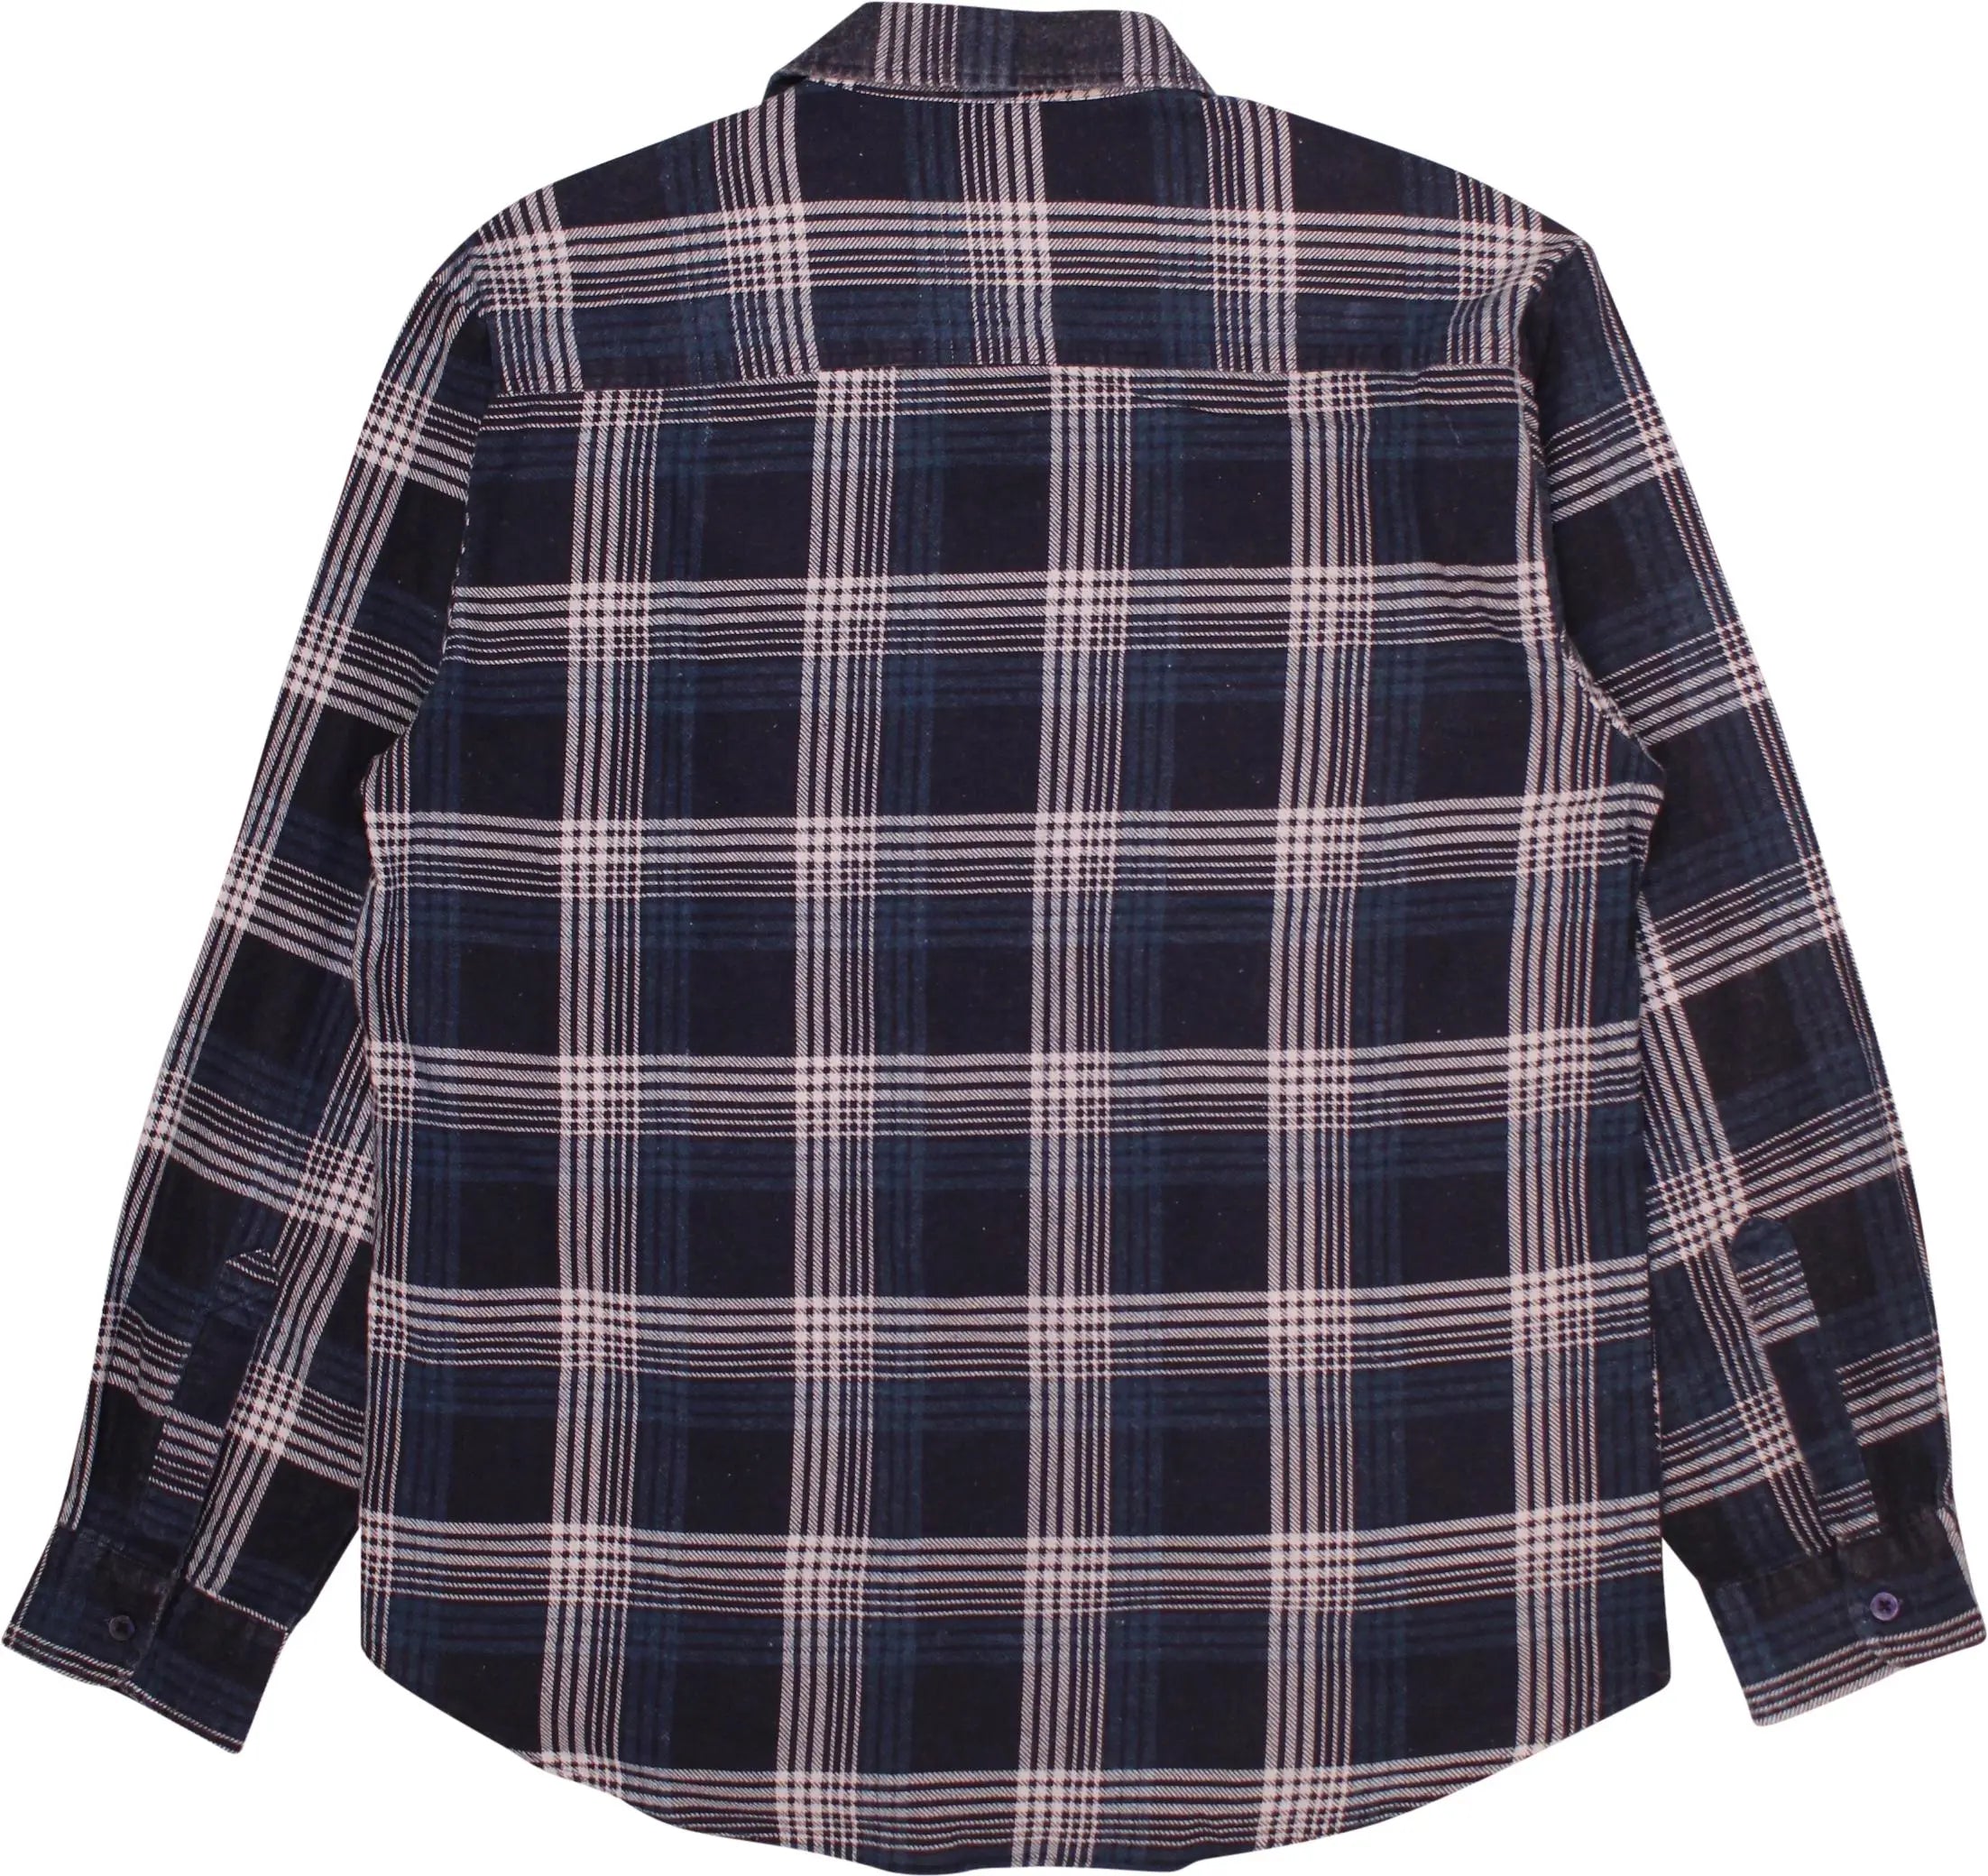 Unknown - Checkered Flannel Shirt- ThriftTale.com - Vintage and second handclothing